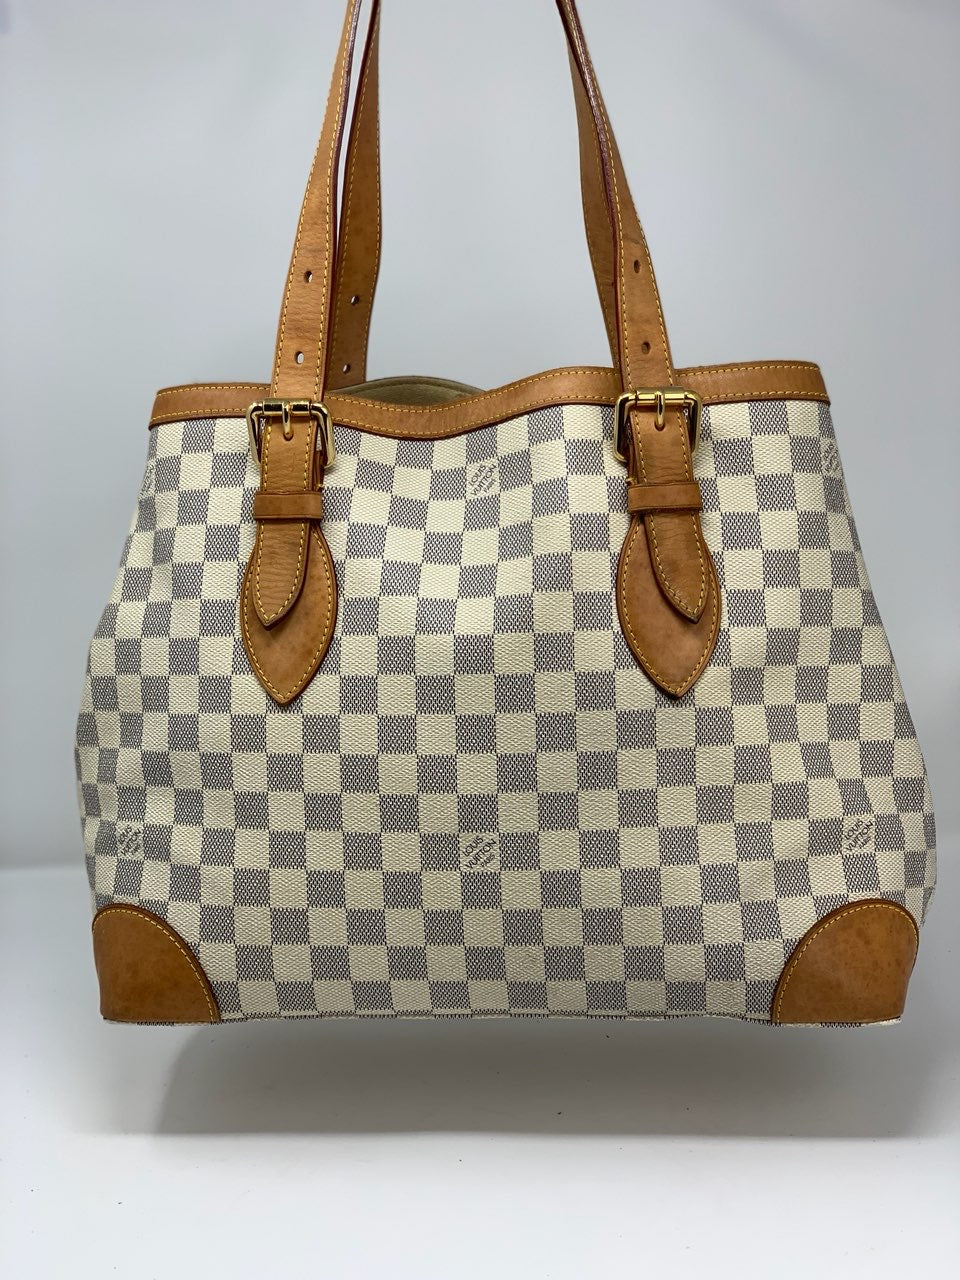 LV Damier Azure Hampstead - #4068 - CALL 214-598-1201 FOR PRICING